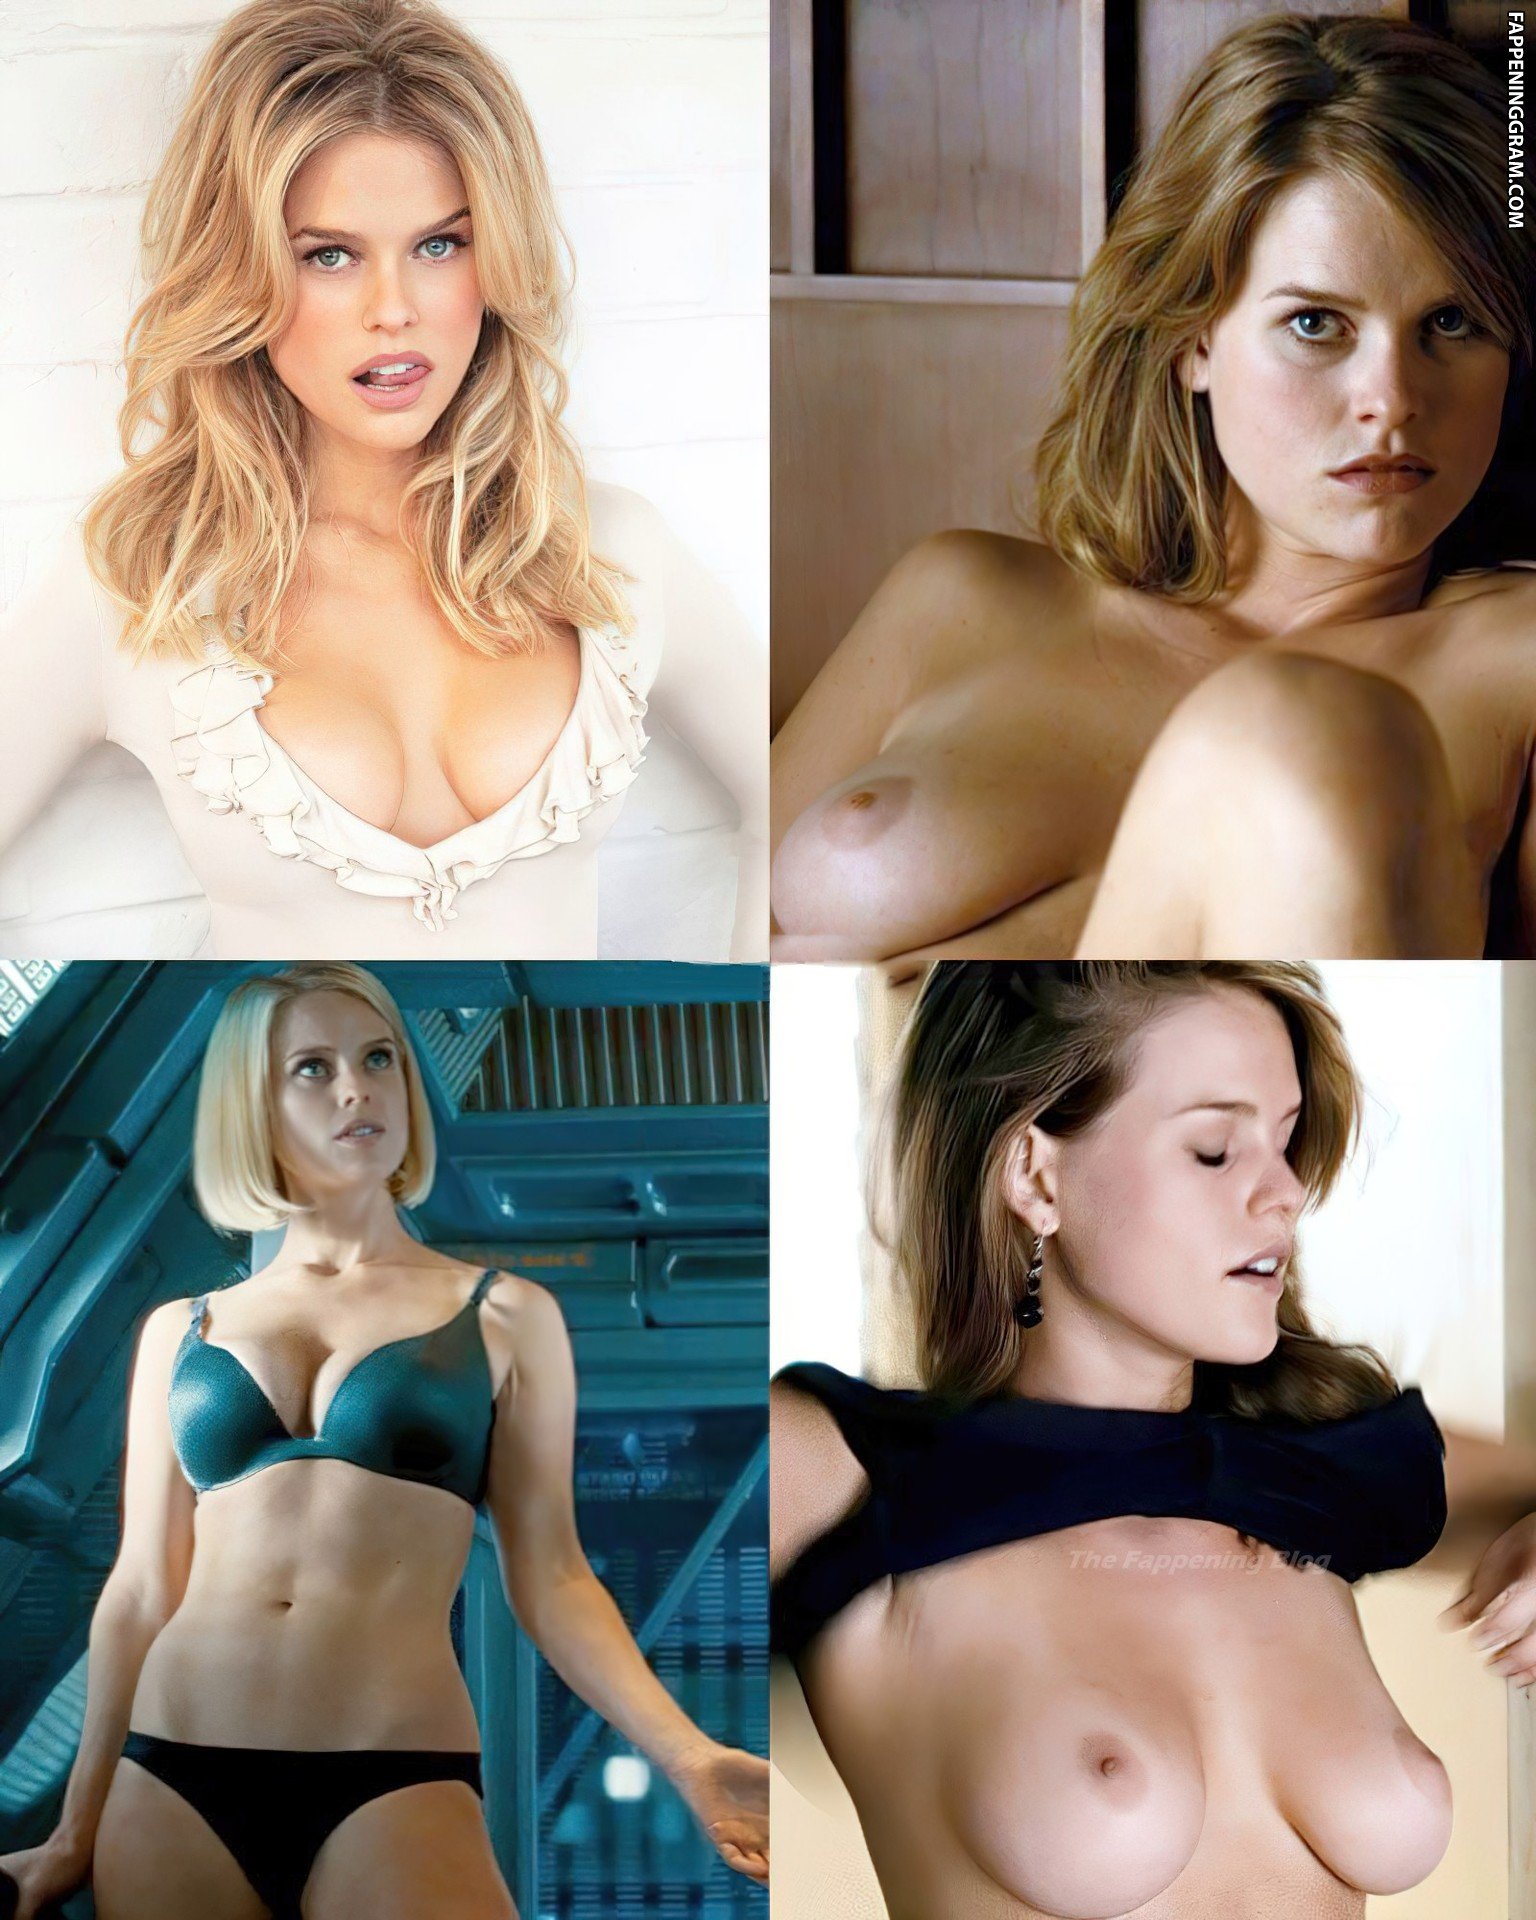 avril dunn add alice eve topless photo